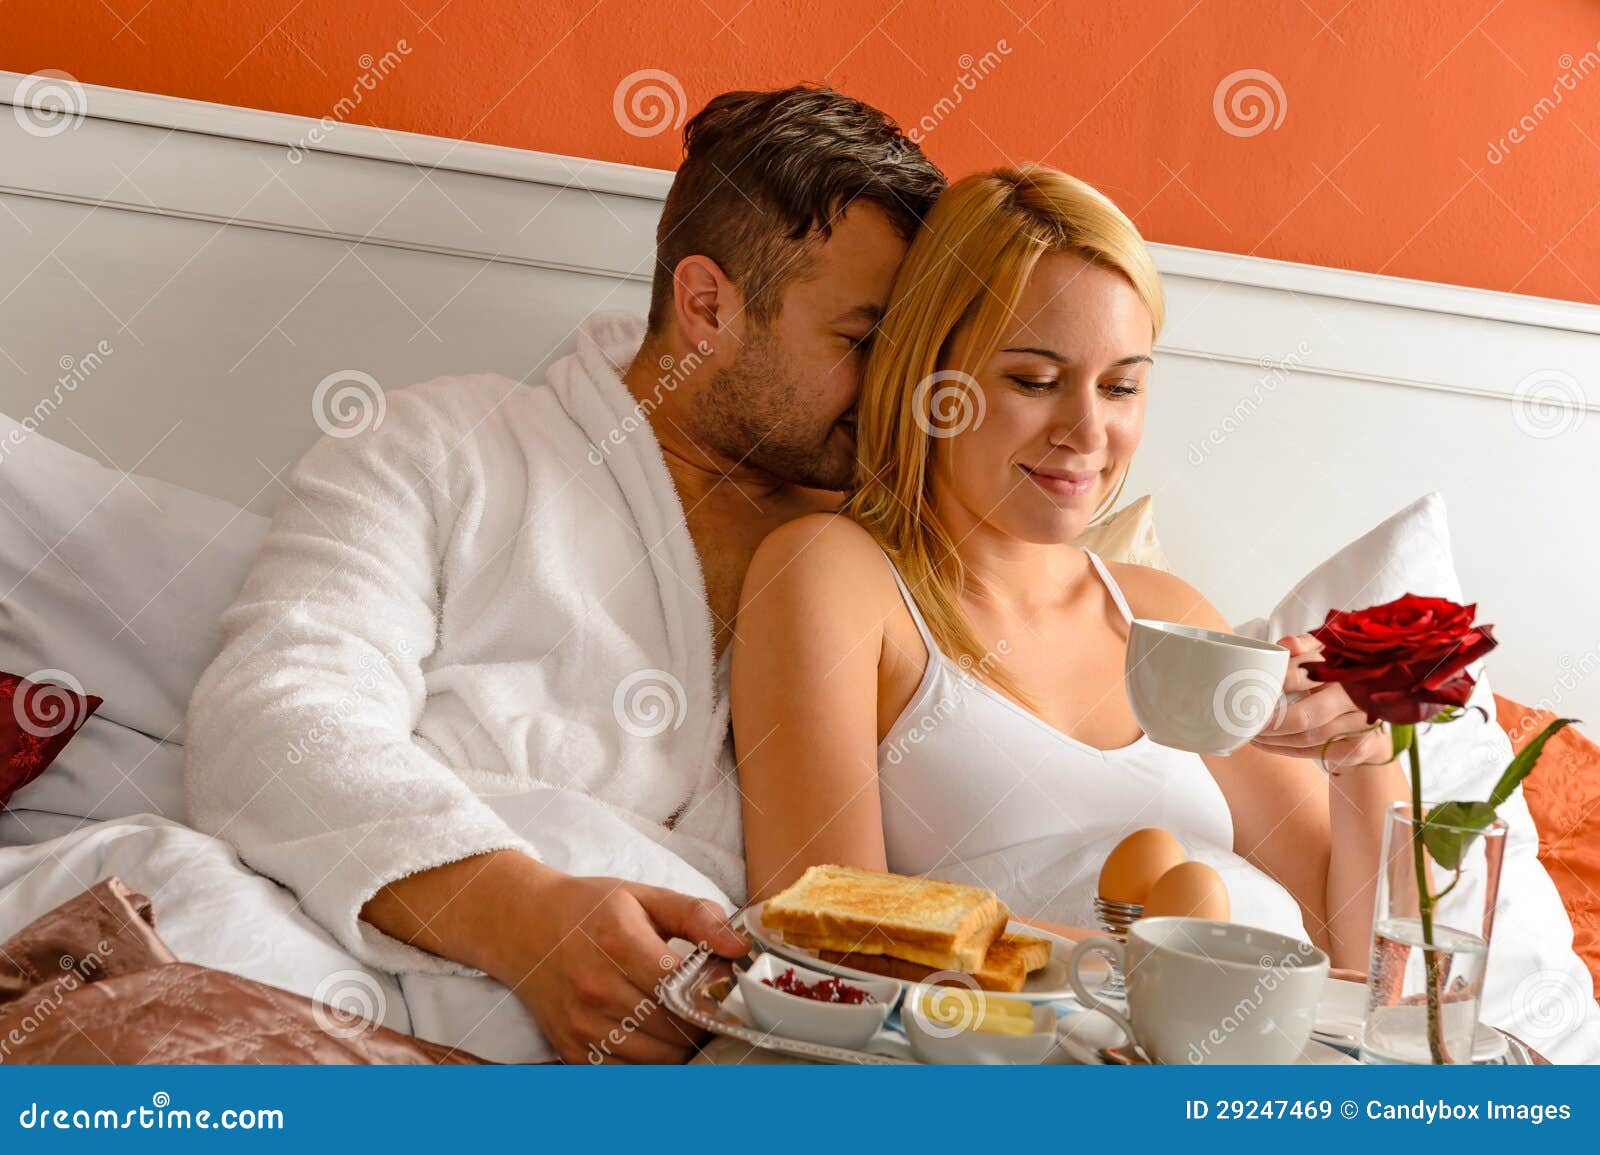 Snuggling Couple Romantic Morning Bed Drinking Coffee Stock Image ...